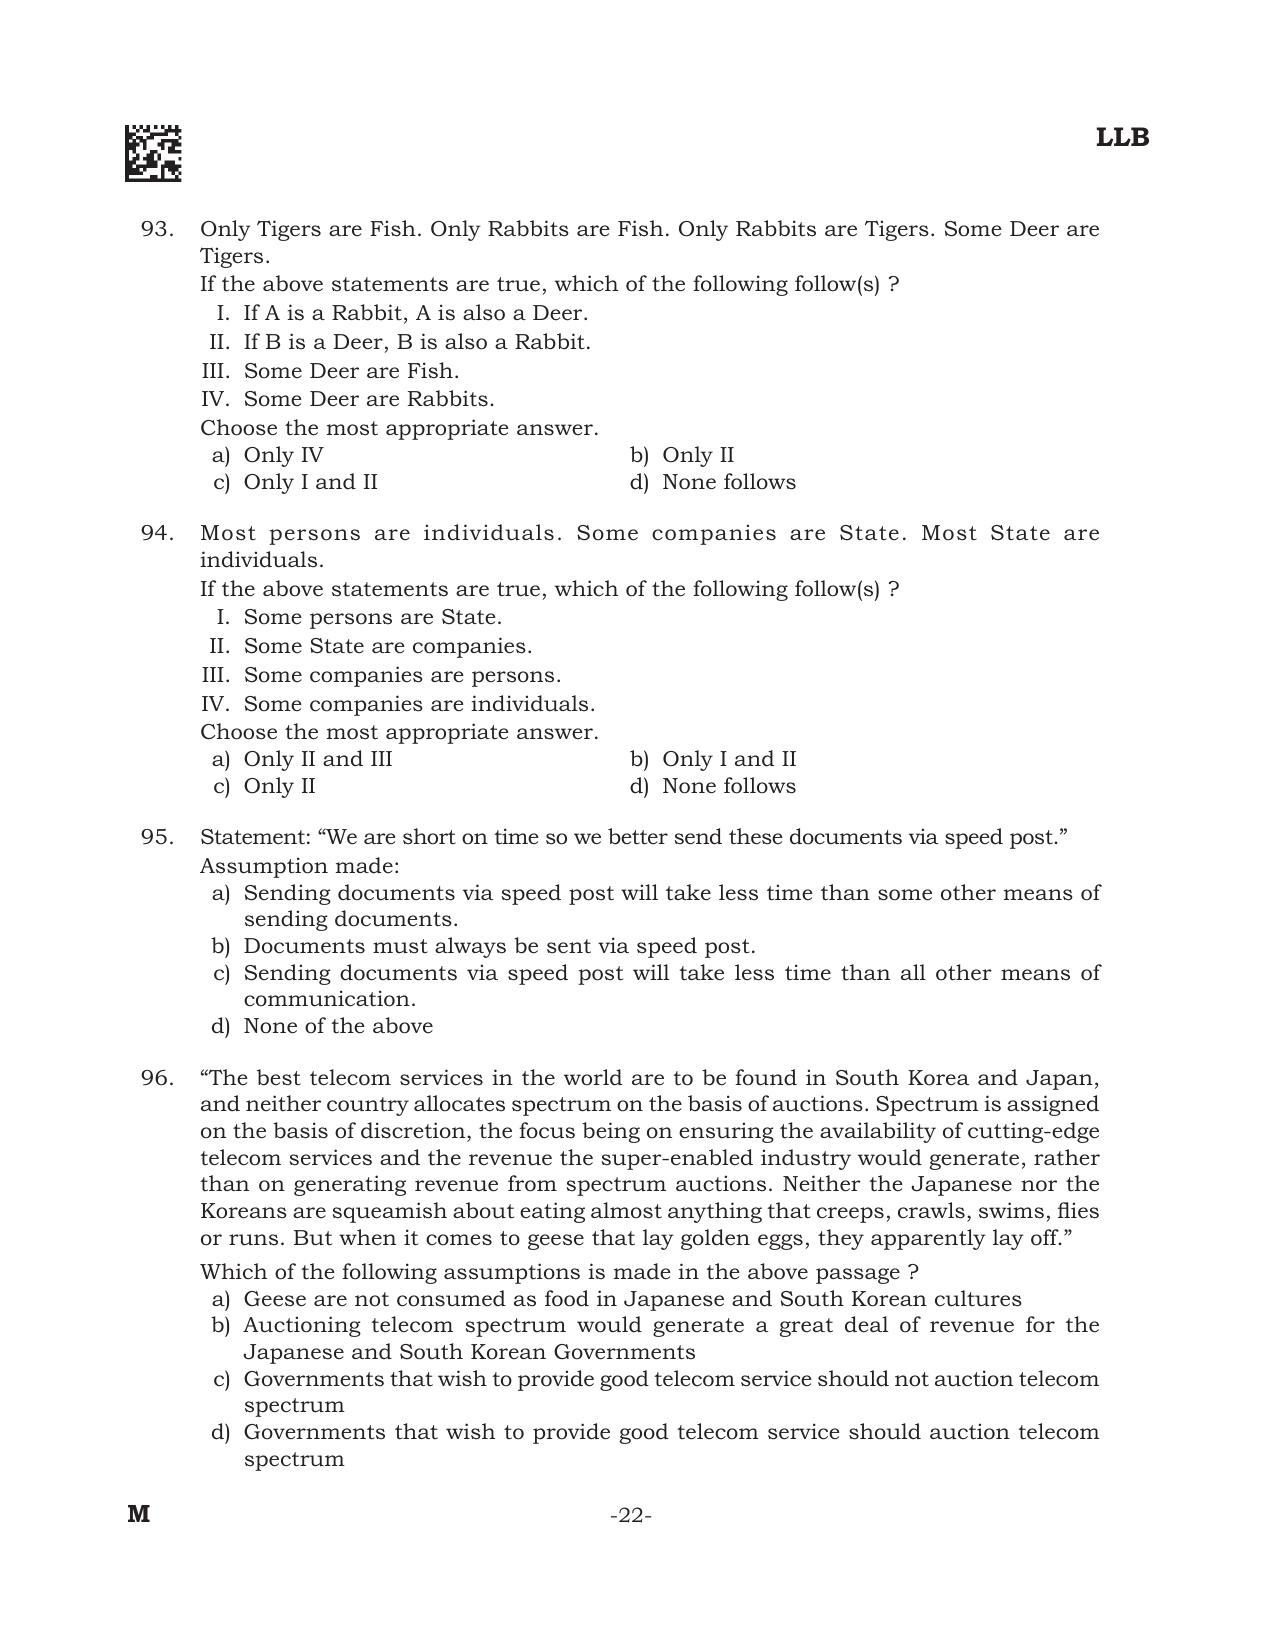 AILET 2022 Question Paper for BA LLB - Page 22